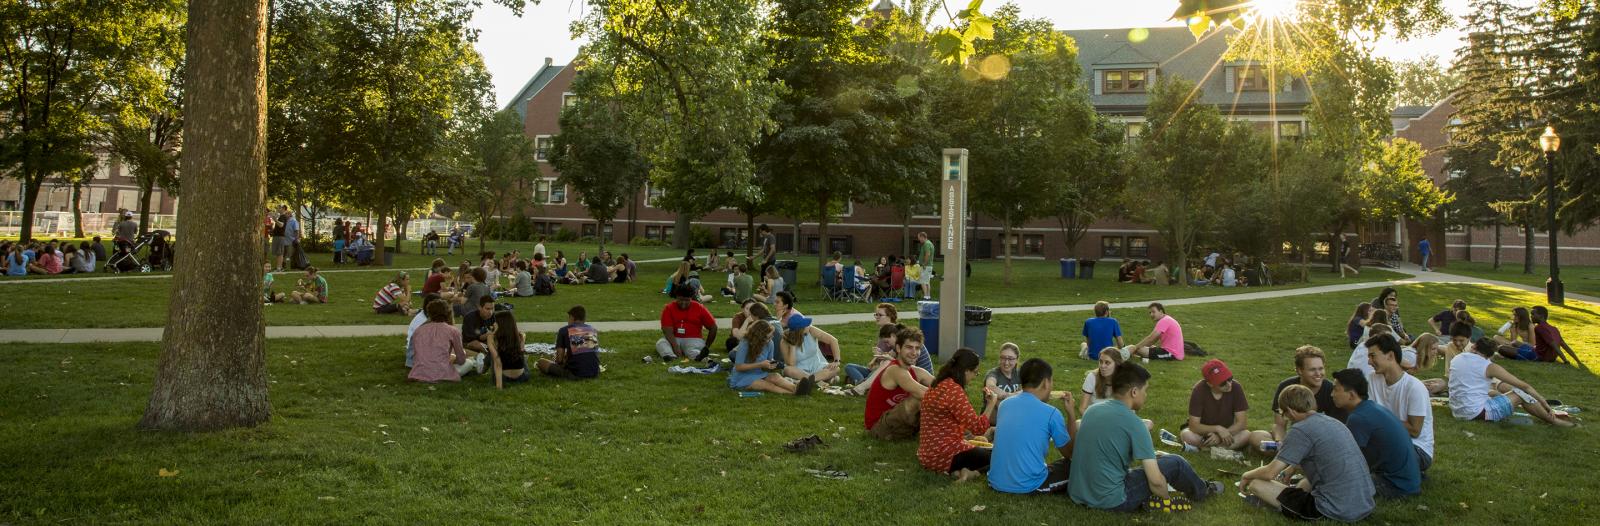 Summer Picnics - Grinnell College